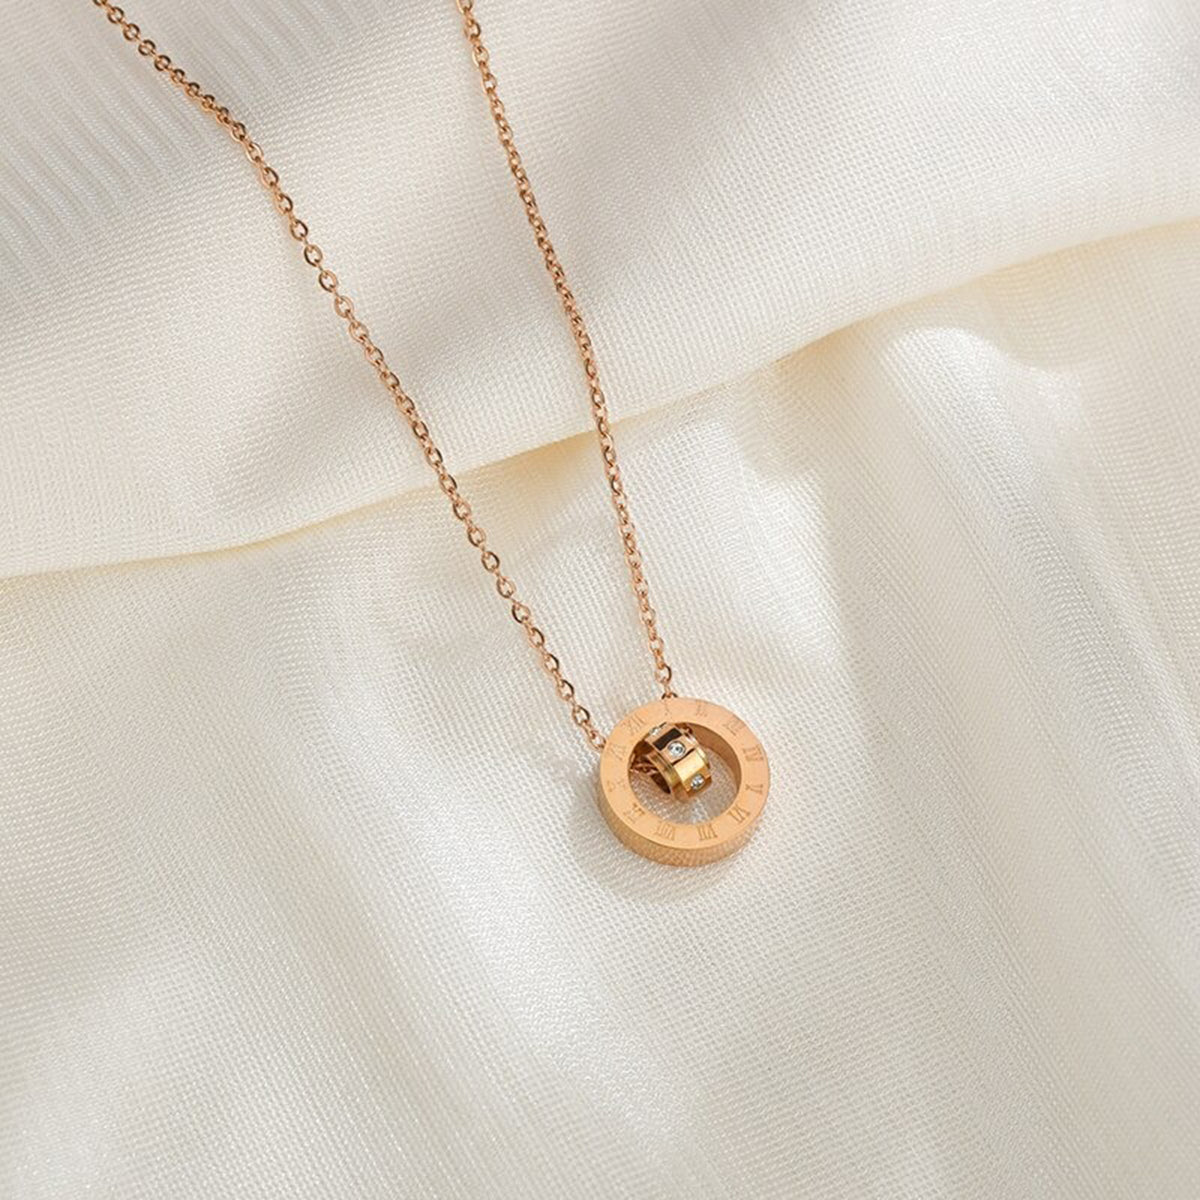 Ring-pendant necklace - Gold-coloured - Ladies | H&M IN